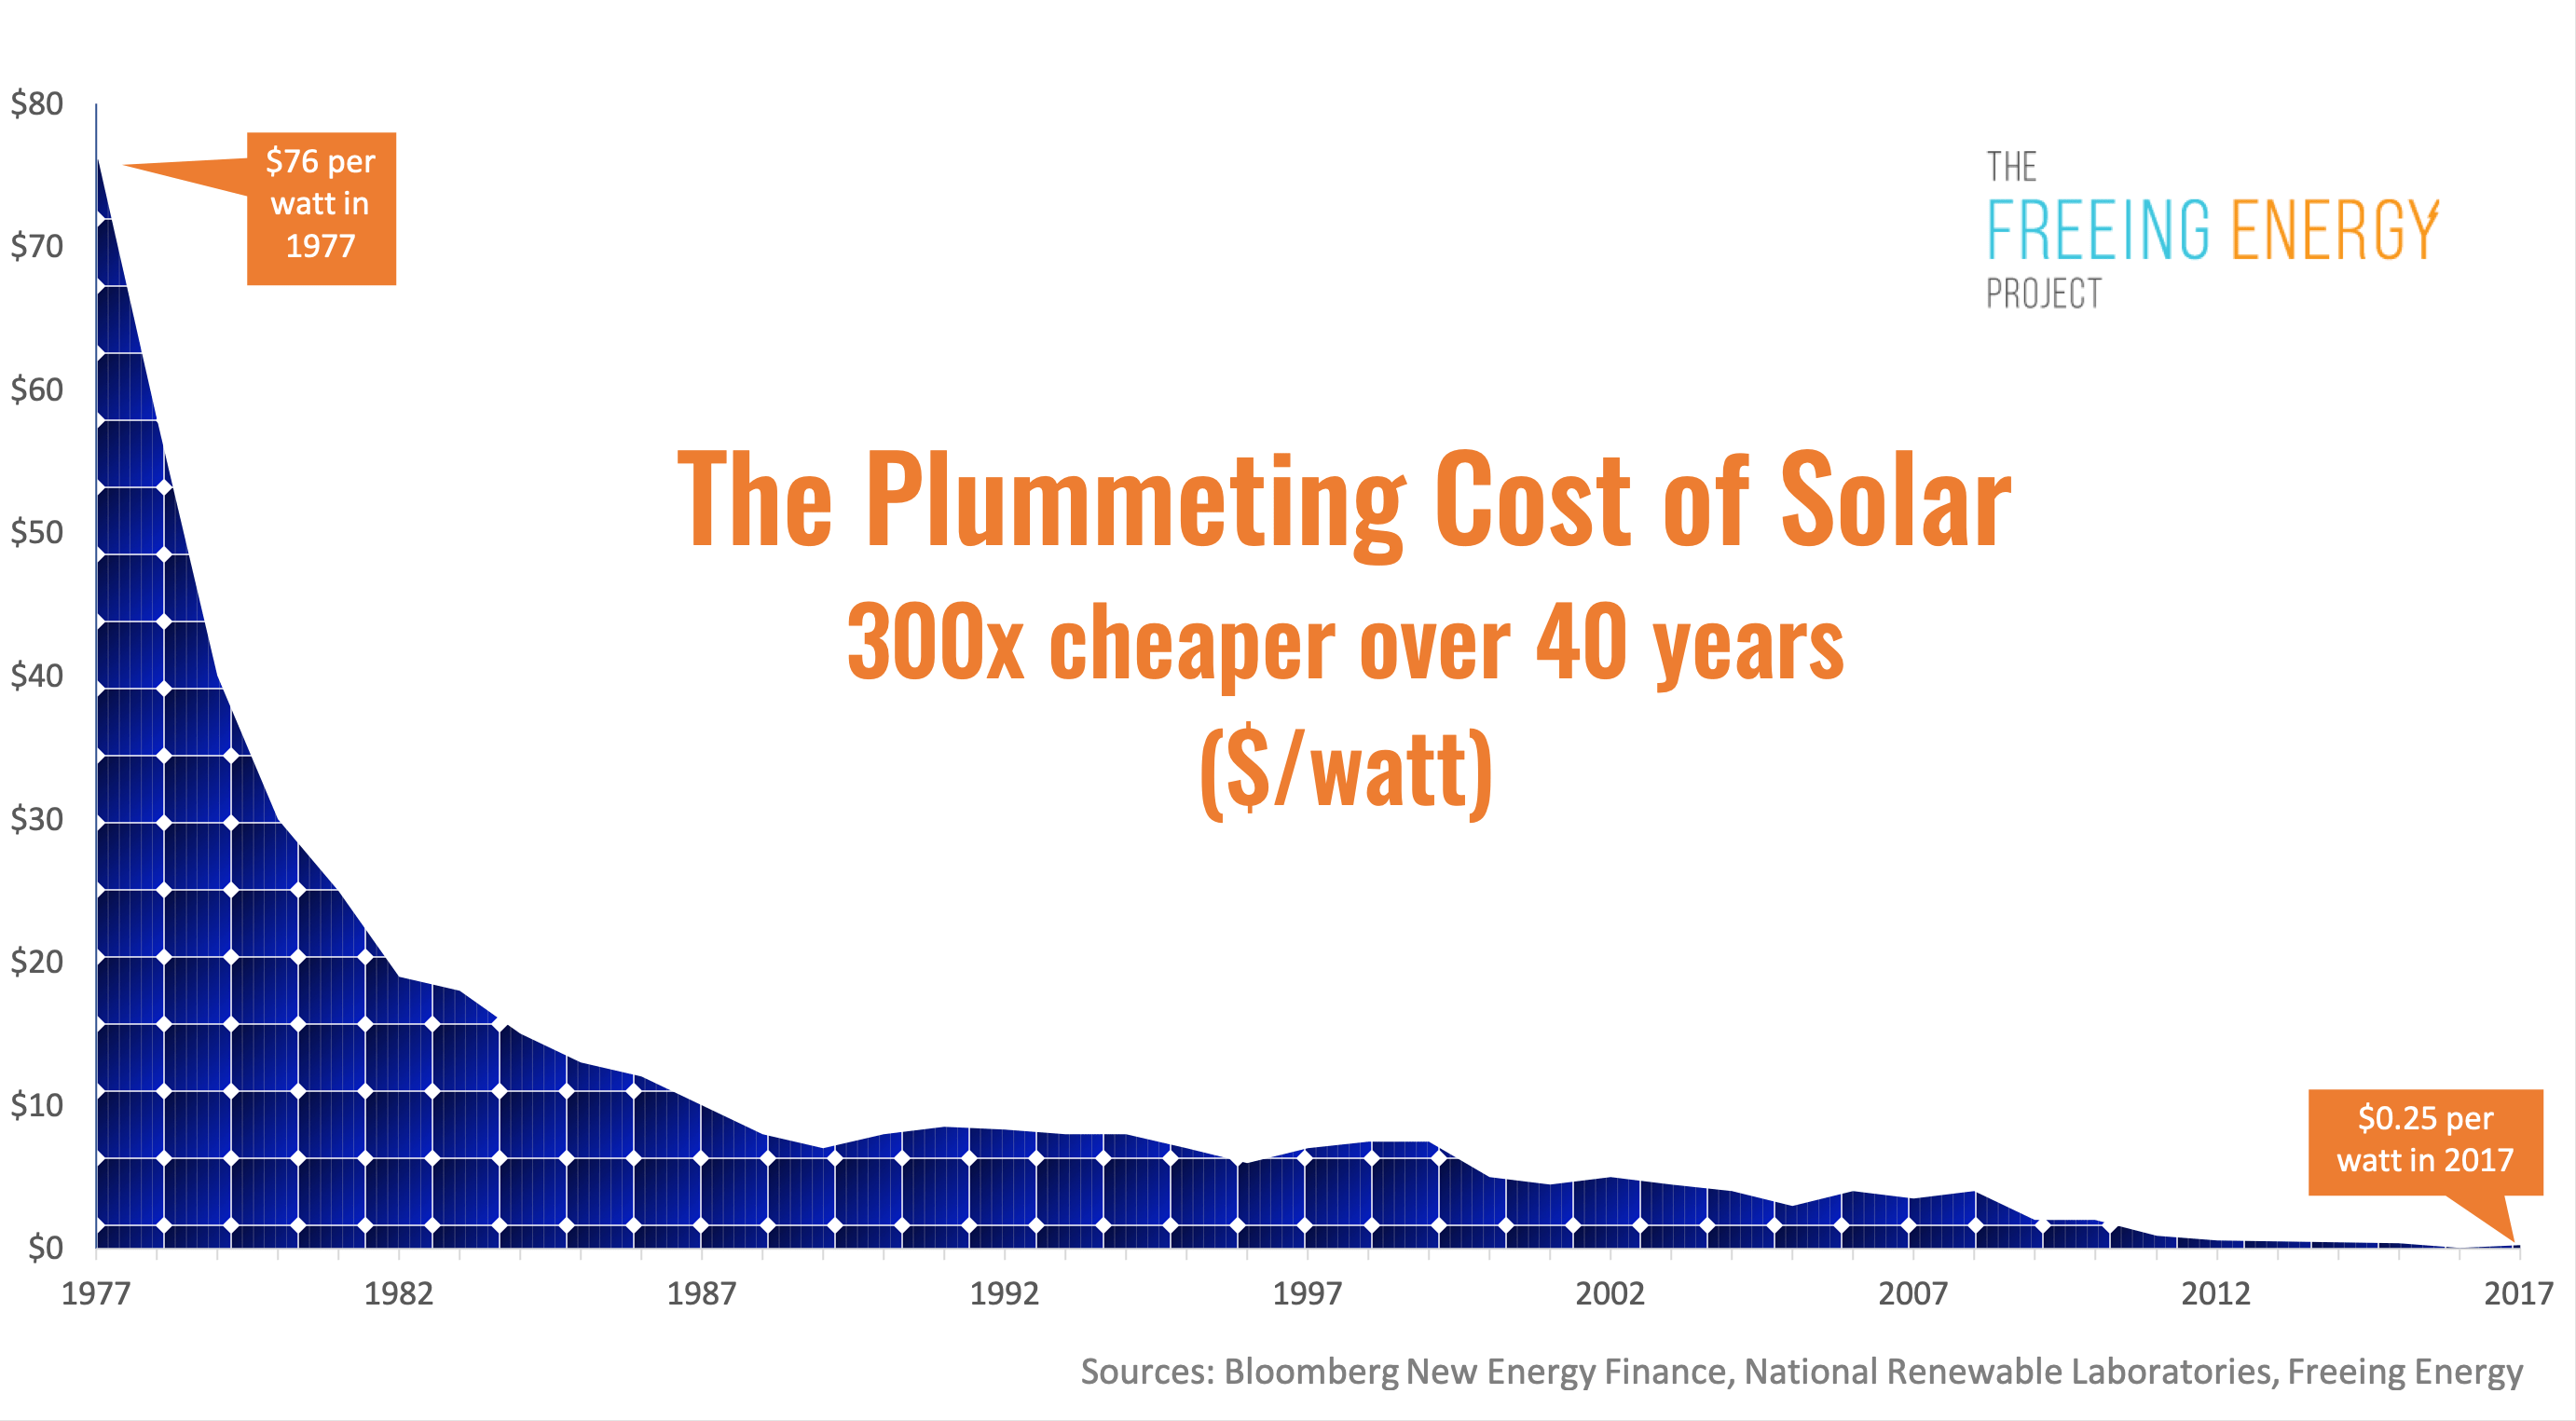 Why does the cost of renewable energy continue to get cheaper?